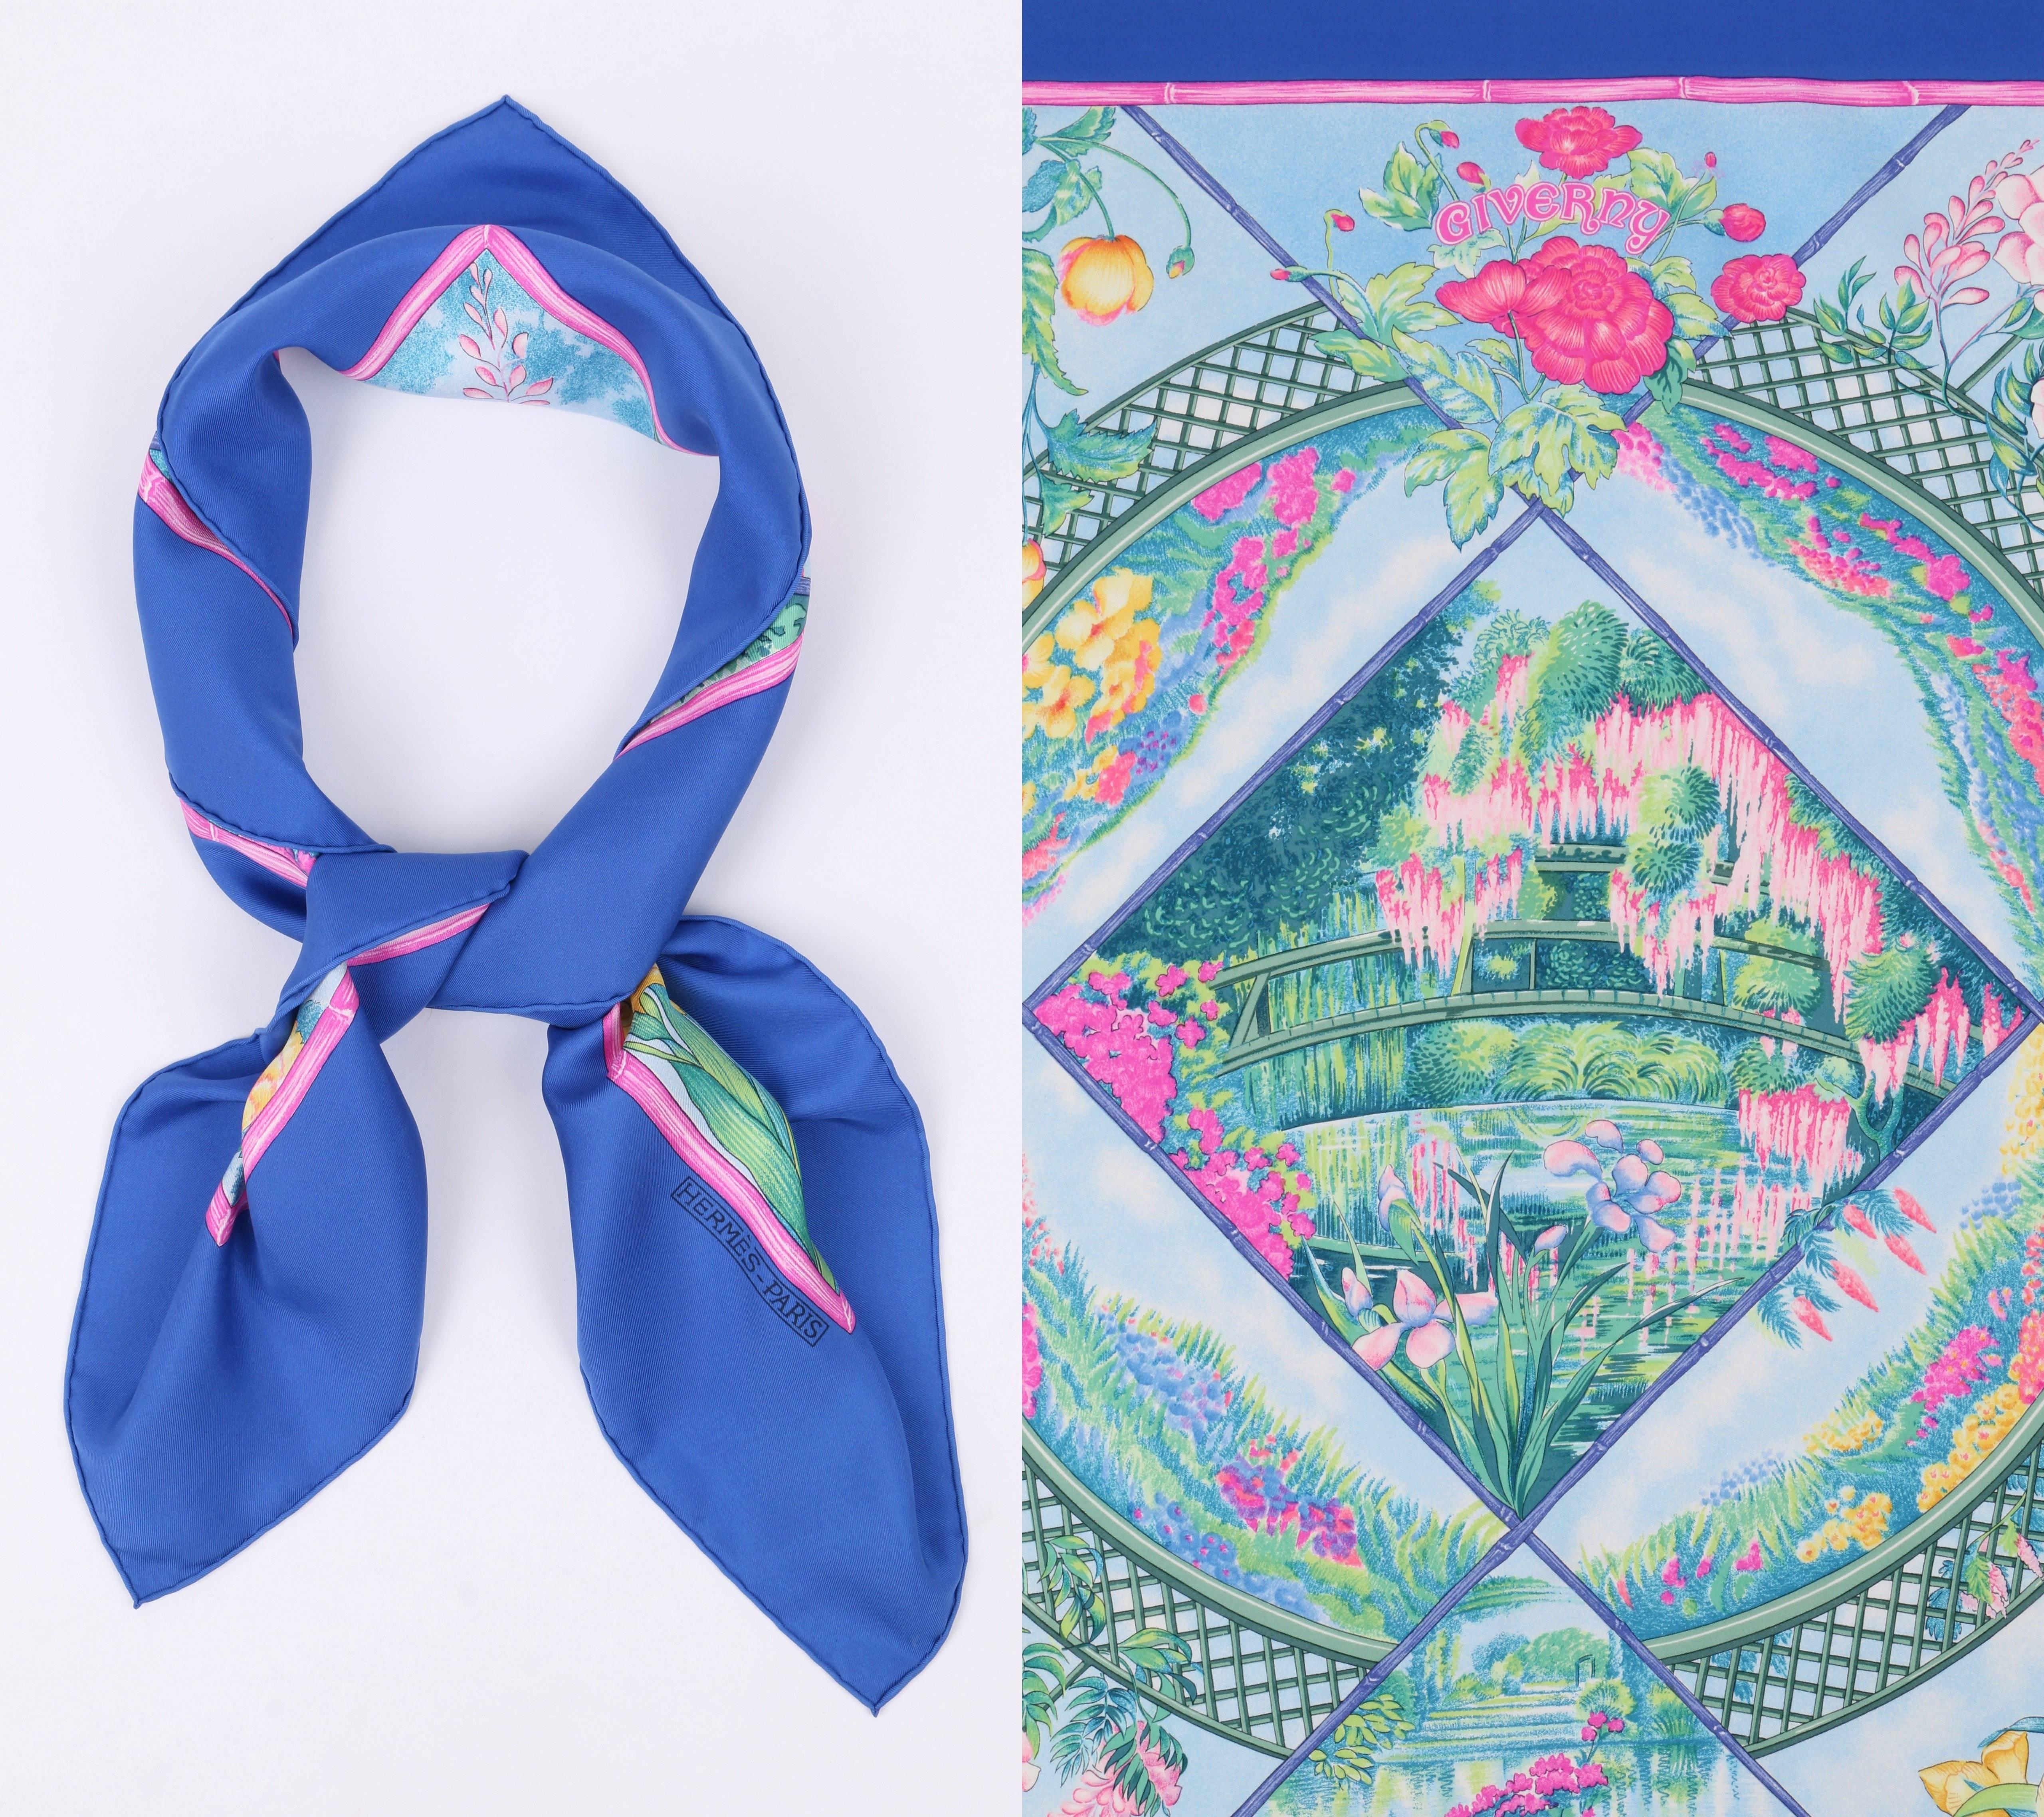 Vintage Hermes c.1989 "Giverny" designed by Lawrence Bourthoumieux silk scarf. Solid royal blue border with center floral and bridge multicolored watercolor design. "Giverny" printed upper center. "Hermes-Paris" printed